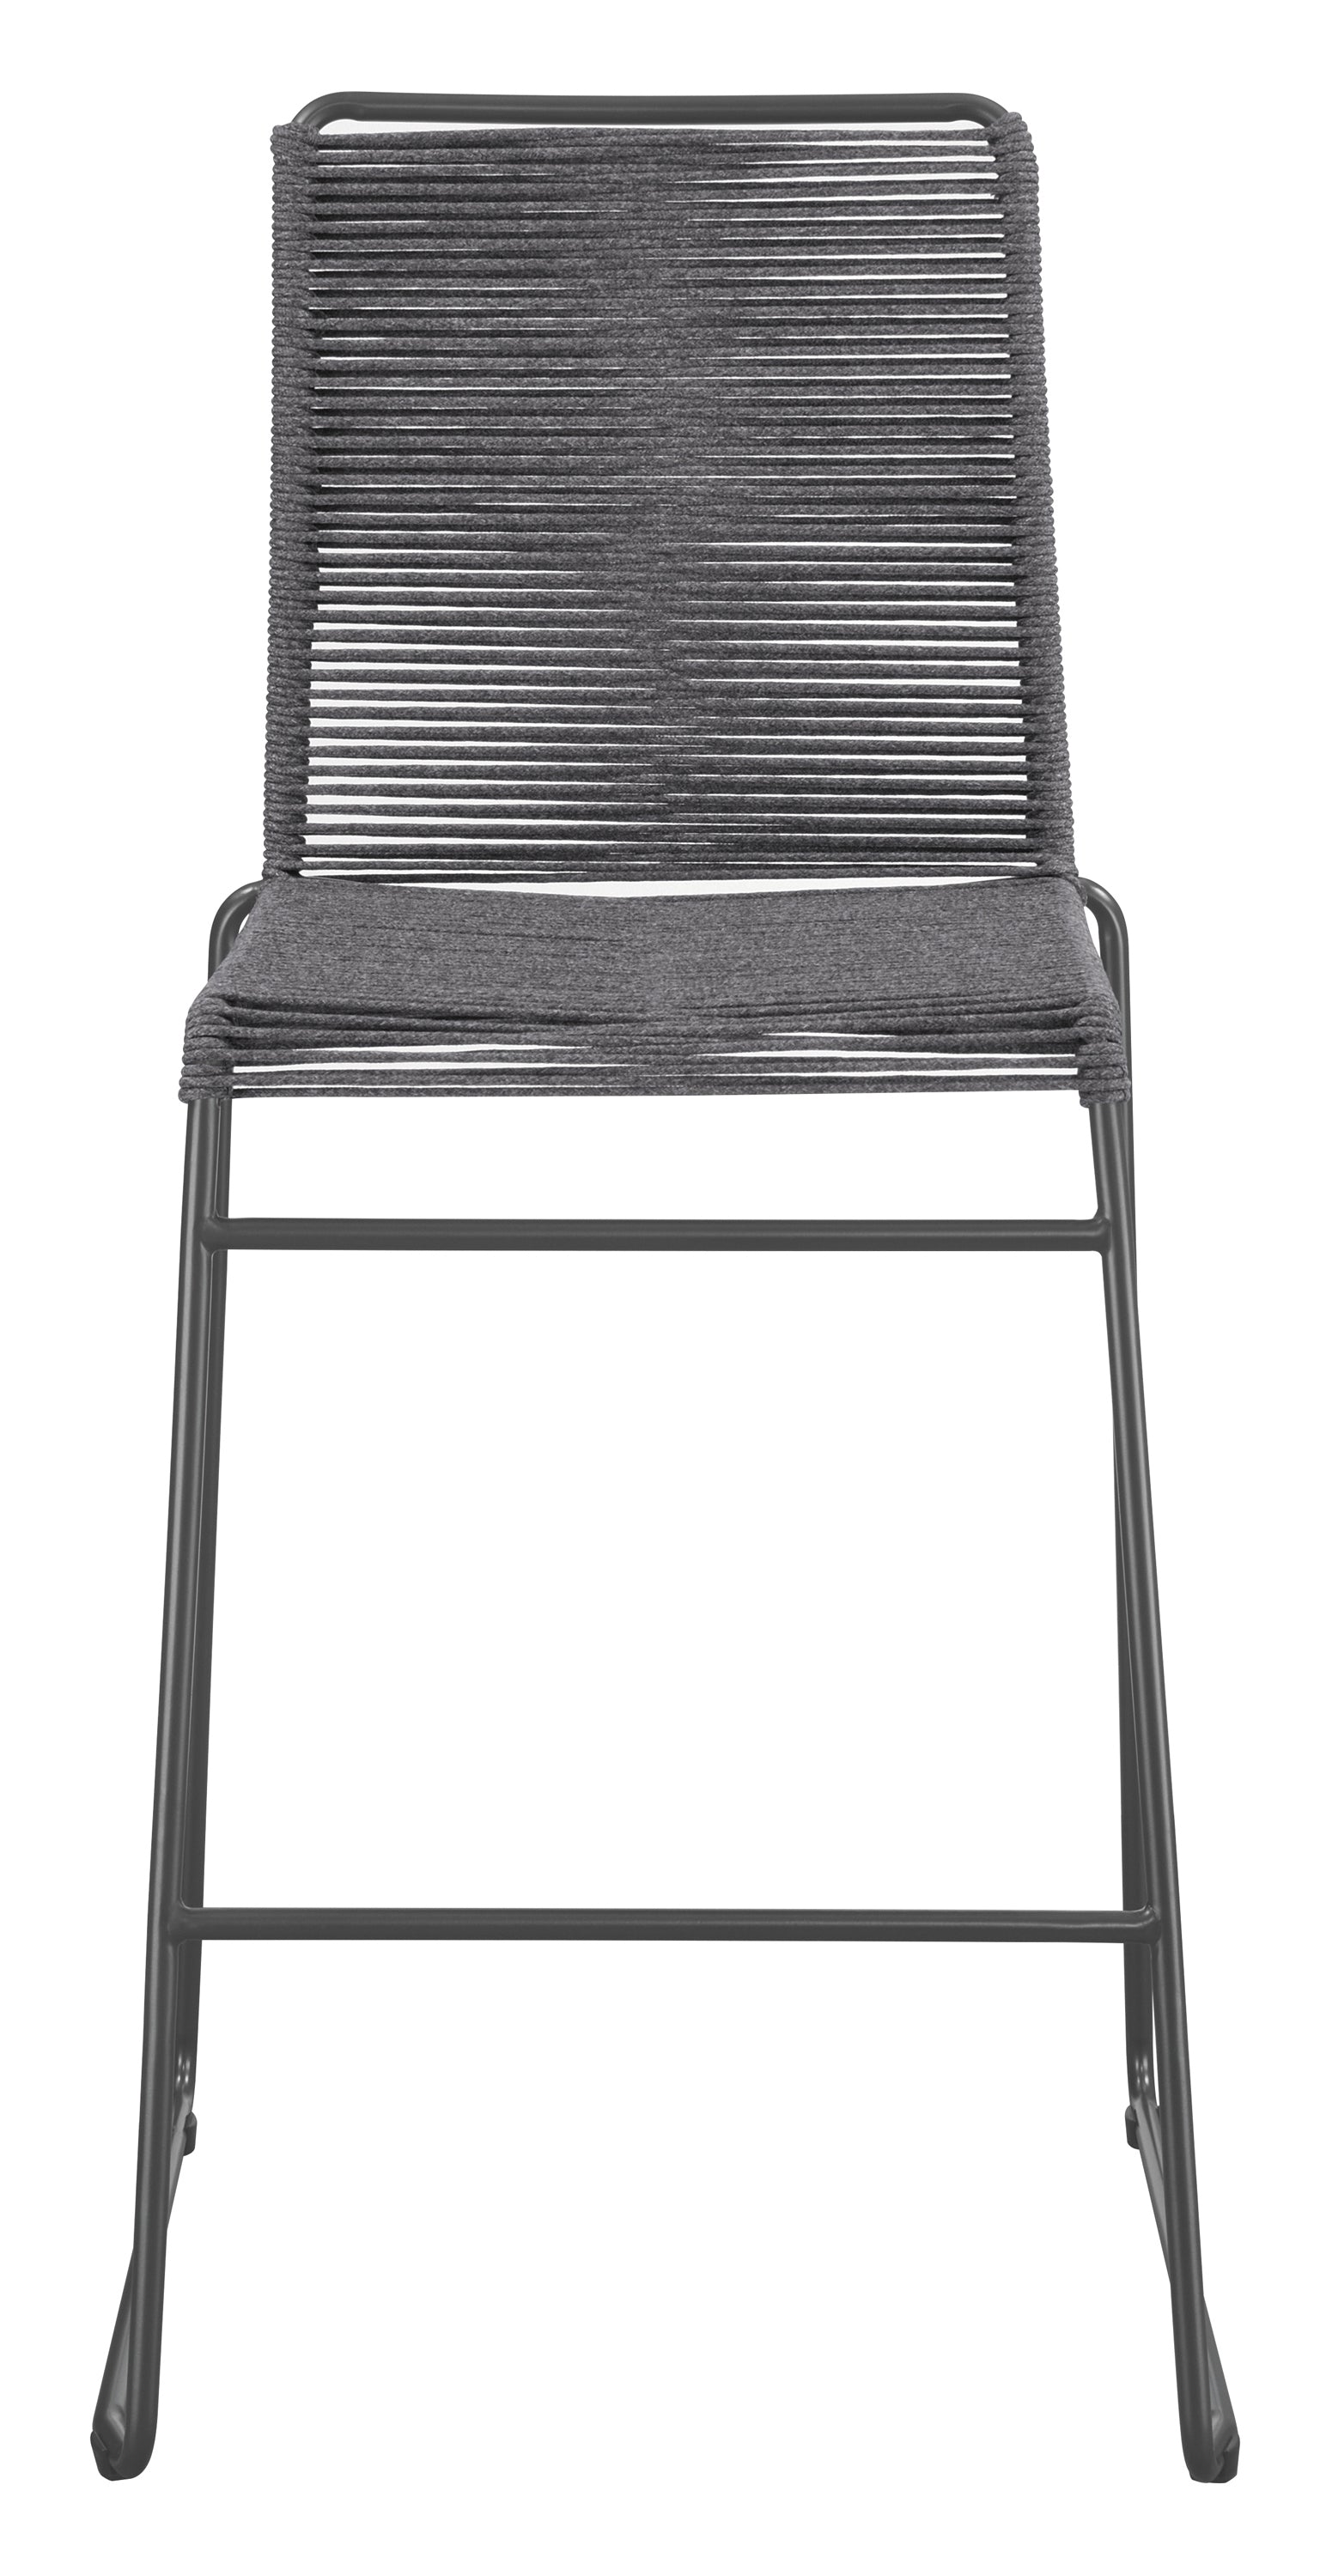 Kai Upholstered Bar Stools with Footrest (Set of 2) Charcoal and Gunmetal